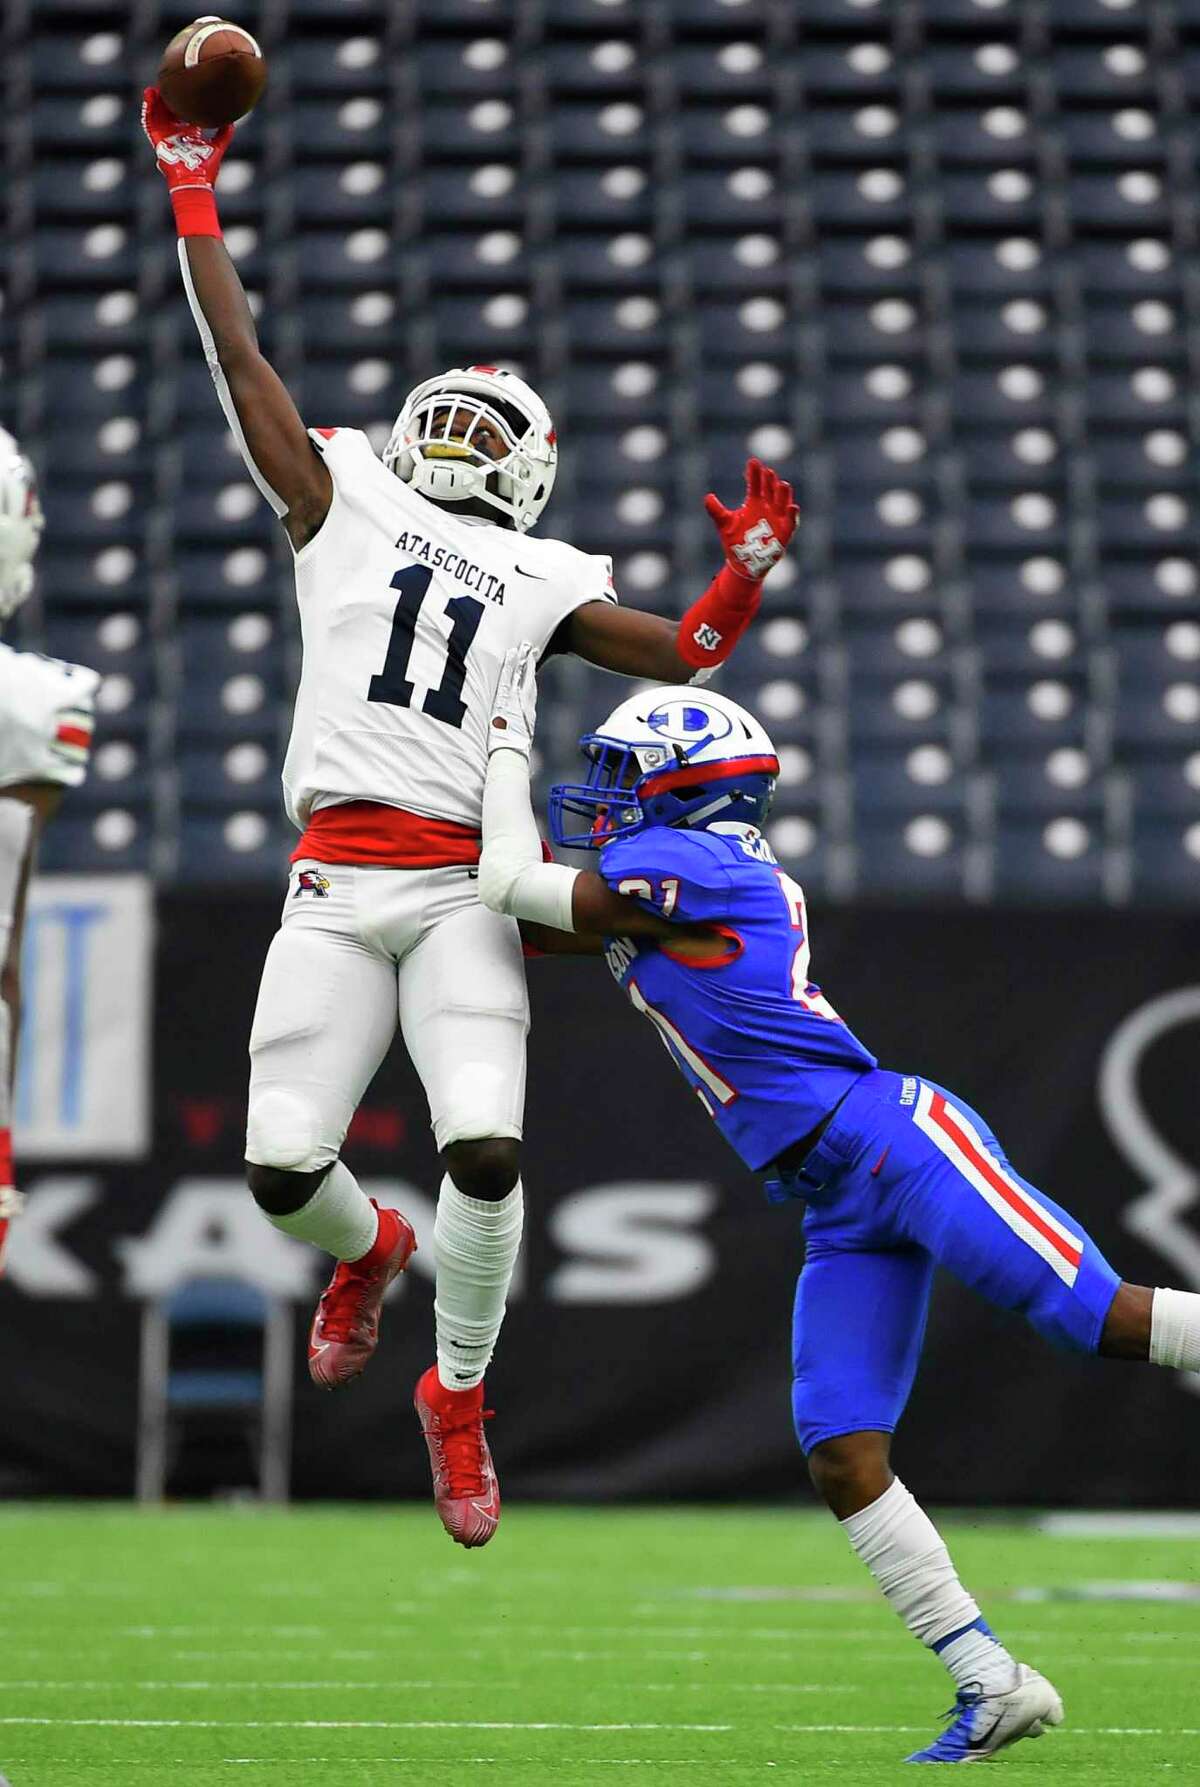 Atascocita wide receiver Dylan Robinson (11) misses a pass as Dickinson defensive back Savien Arnett defends during the first half of a high school football playoff game, Saturday, Nov. 23, 2019, in Houston.